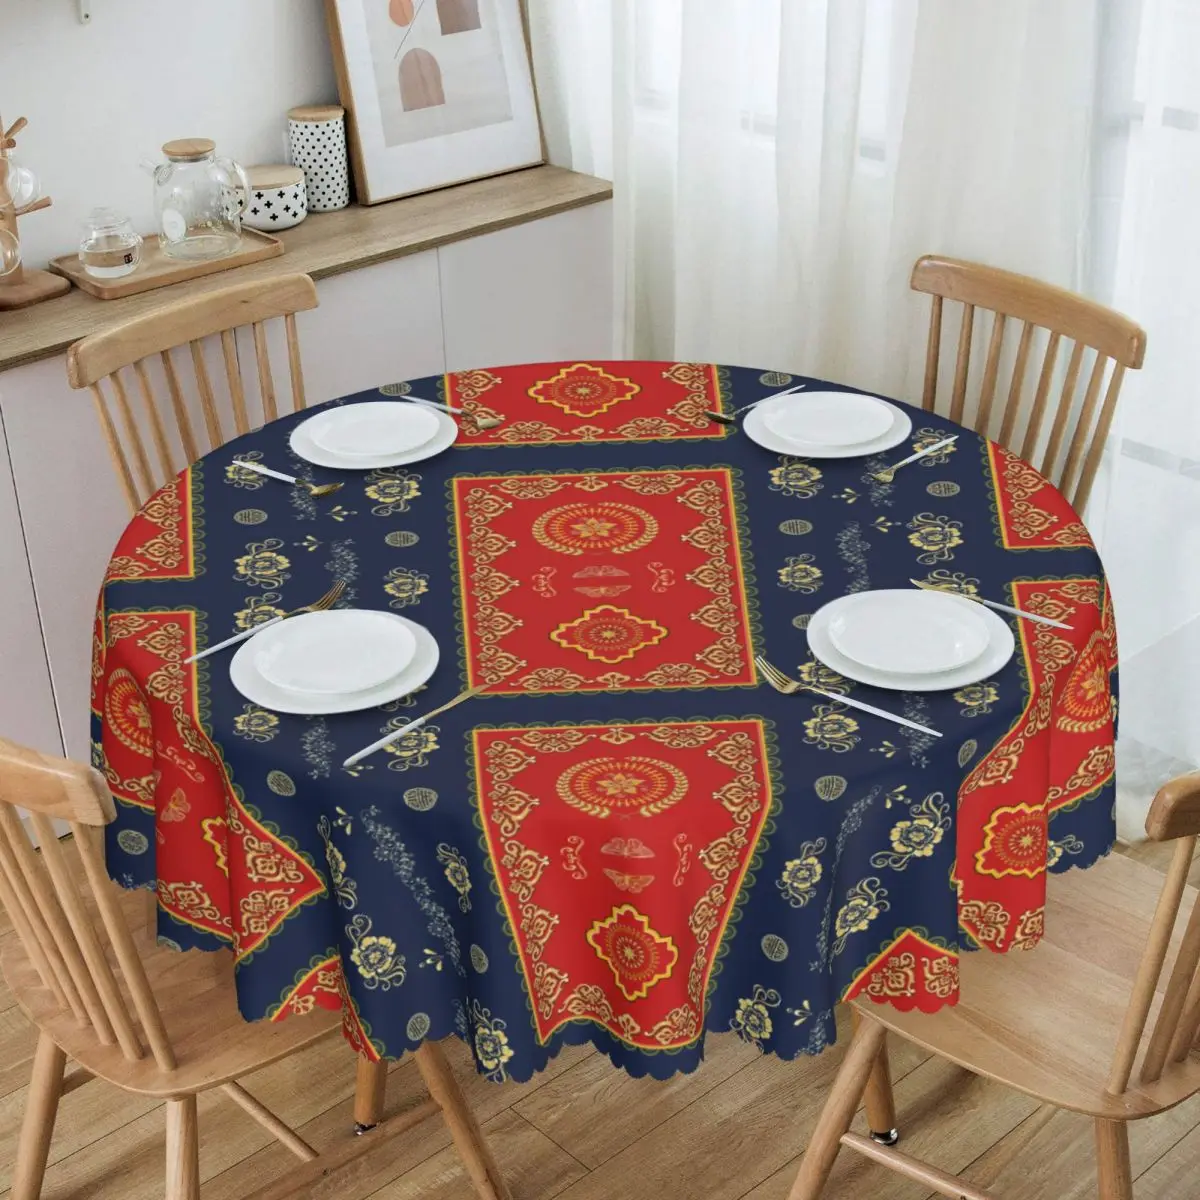 

Round Tablecloth Tablecloth 60 inches Kitchen Dinning Table Cloth Waterproof Bohemian Rug Ethnic Tribal Style Table Cover